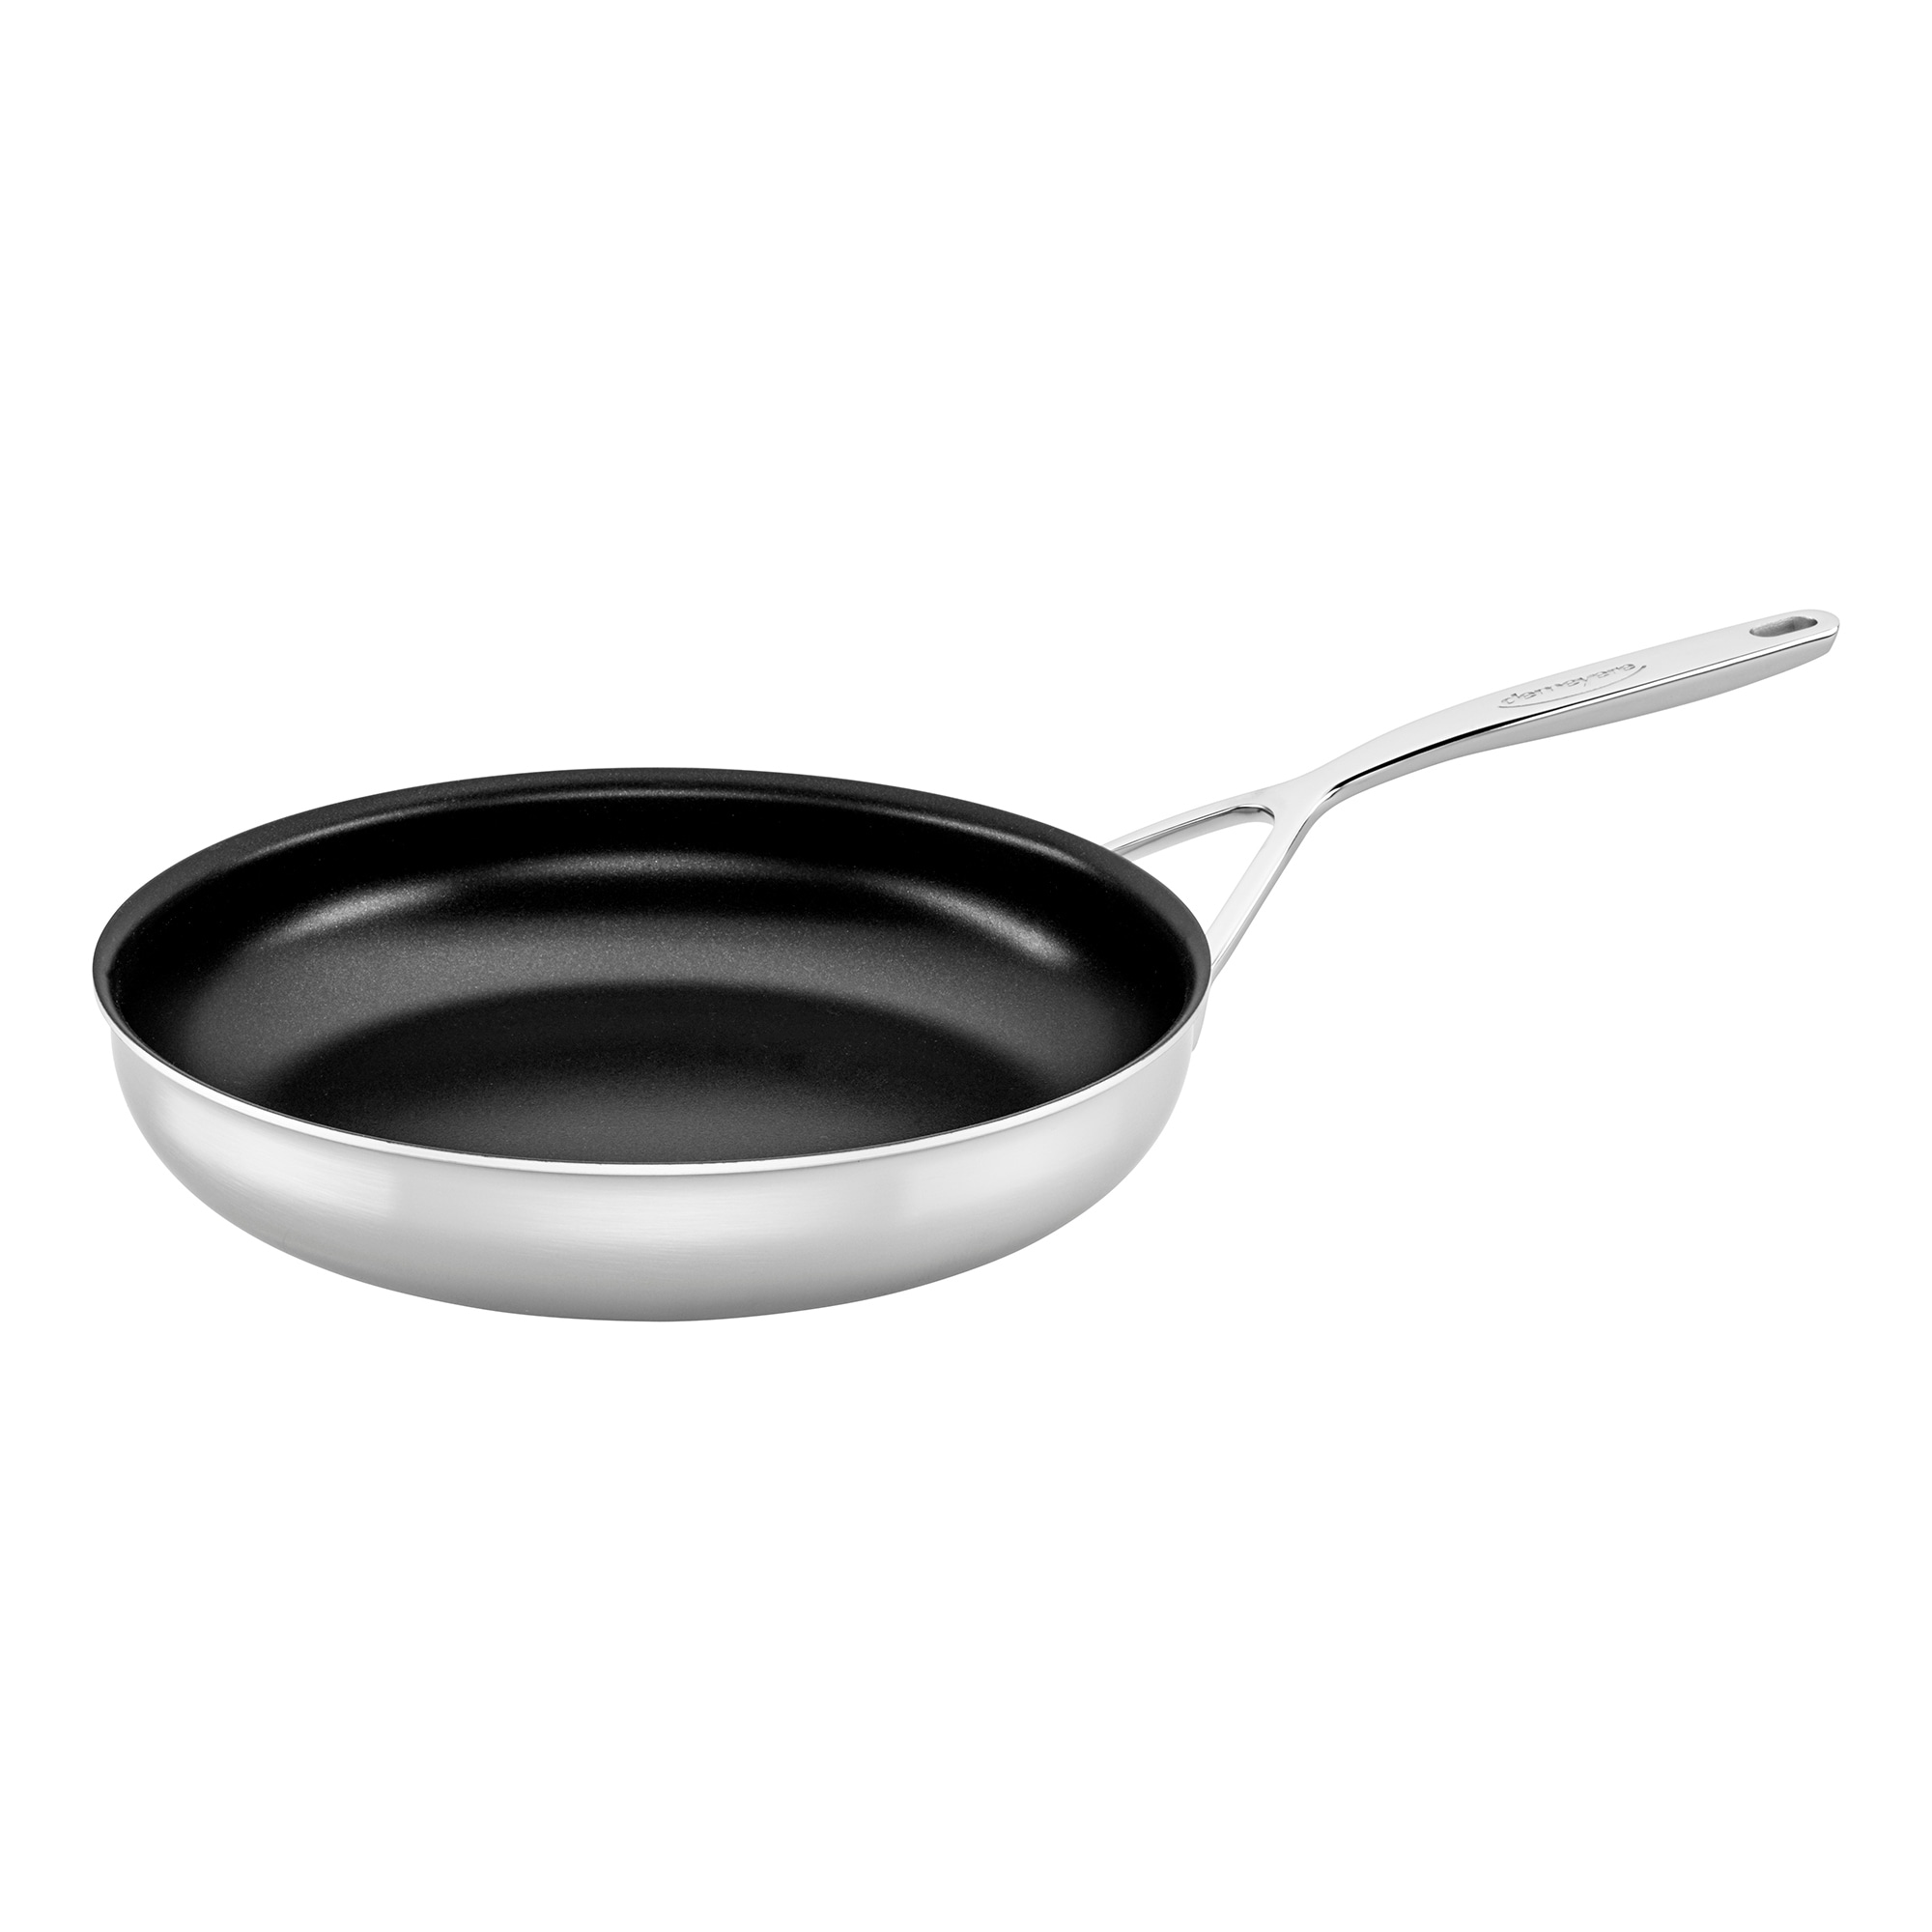 https://ak1.ostkcdn.com/images/products/is/images/direct/30e5b56f5587e63540cea8efbd77a11c970c3626/Demeyere-5-Plus-Stainless-Steel-Non-Stick-Fry-Pan.jpg